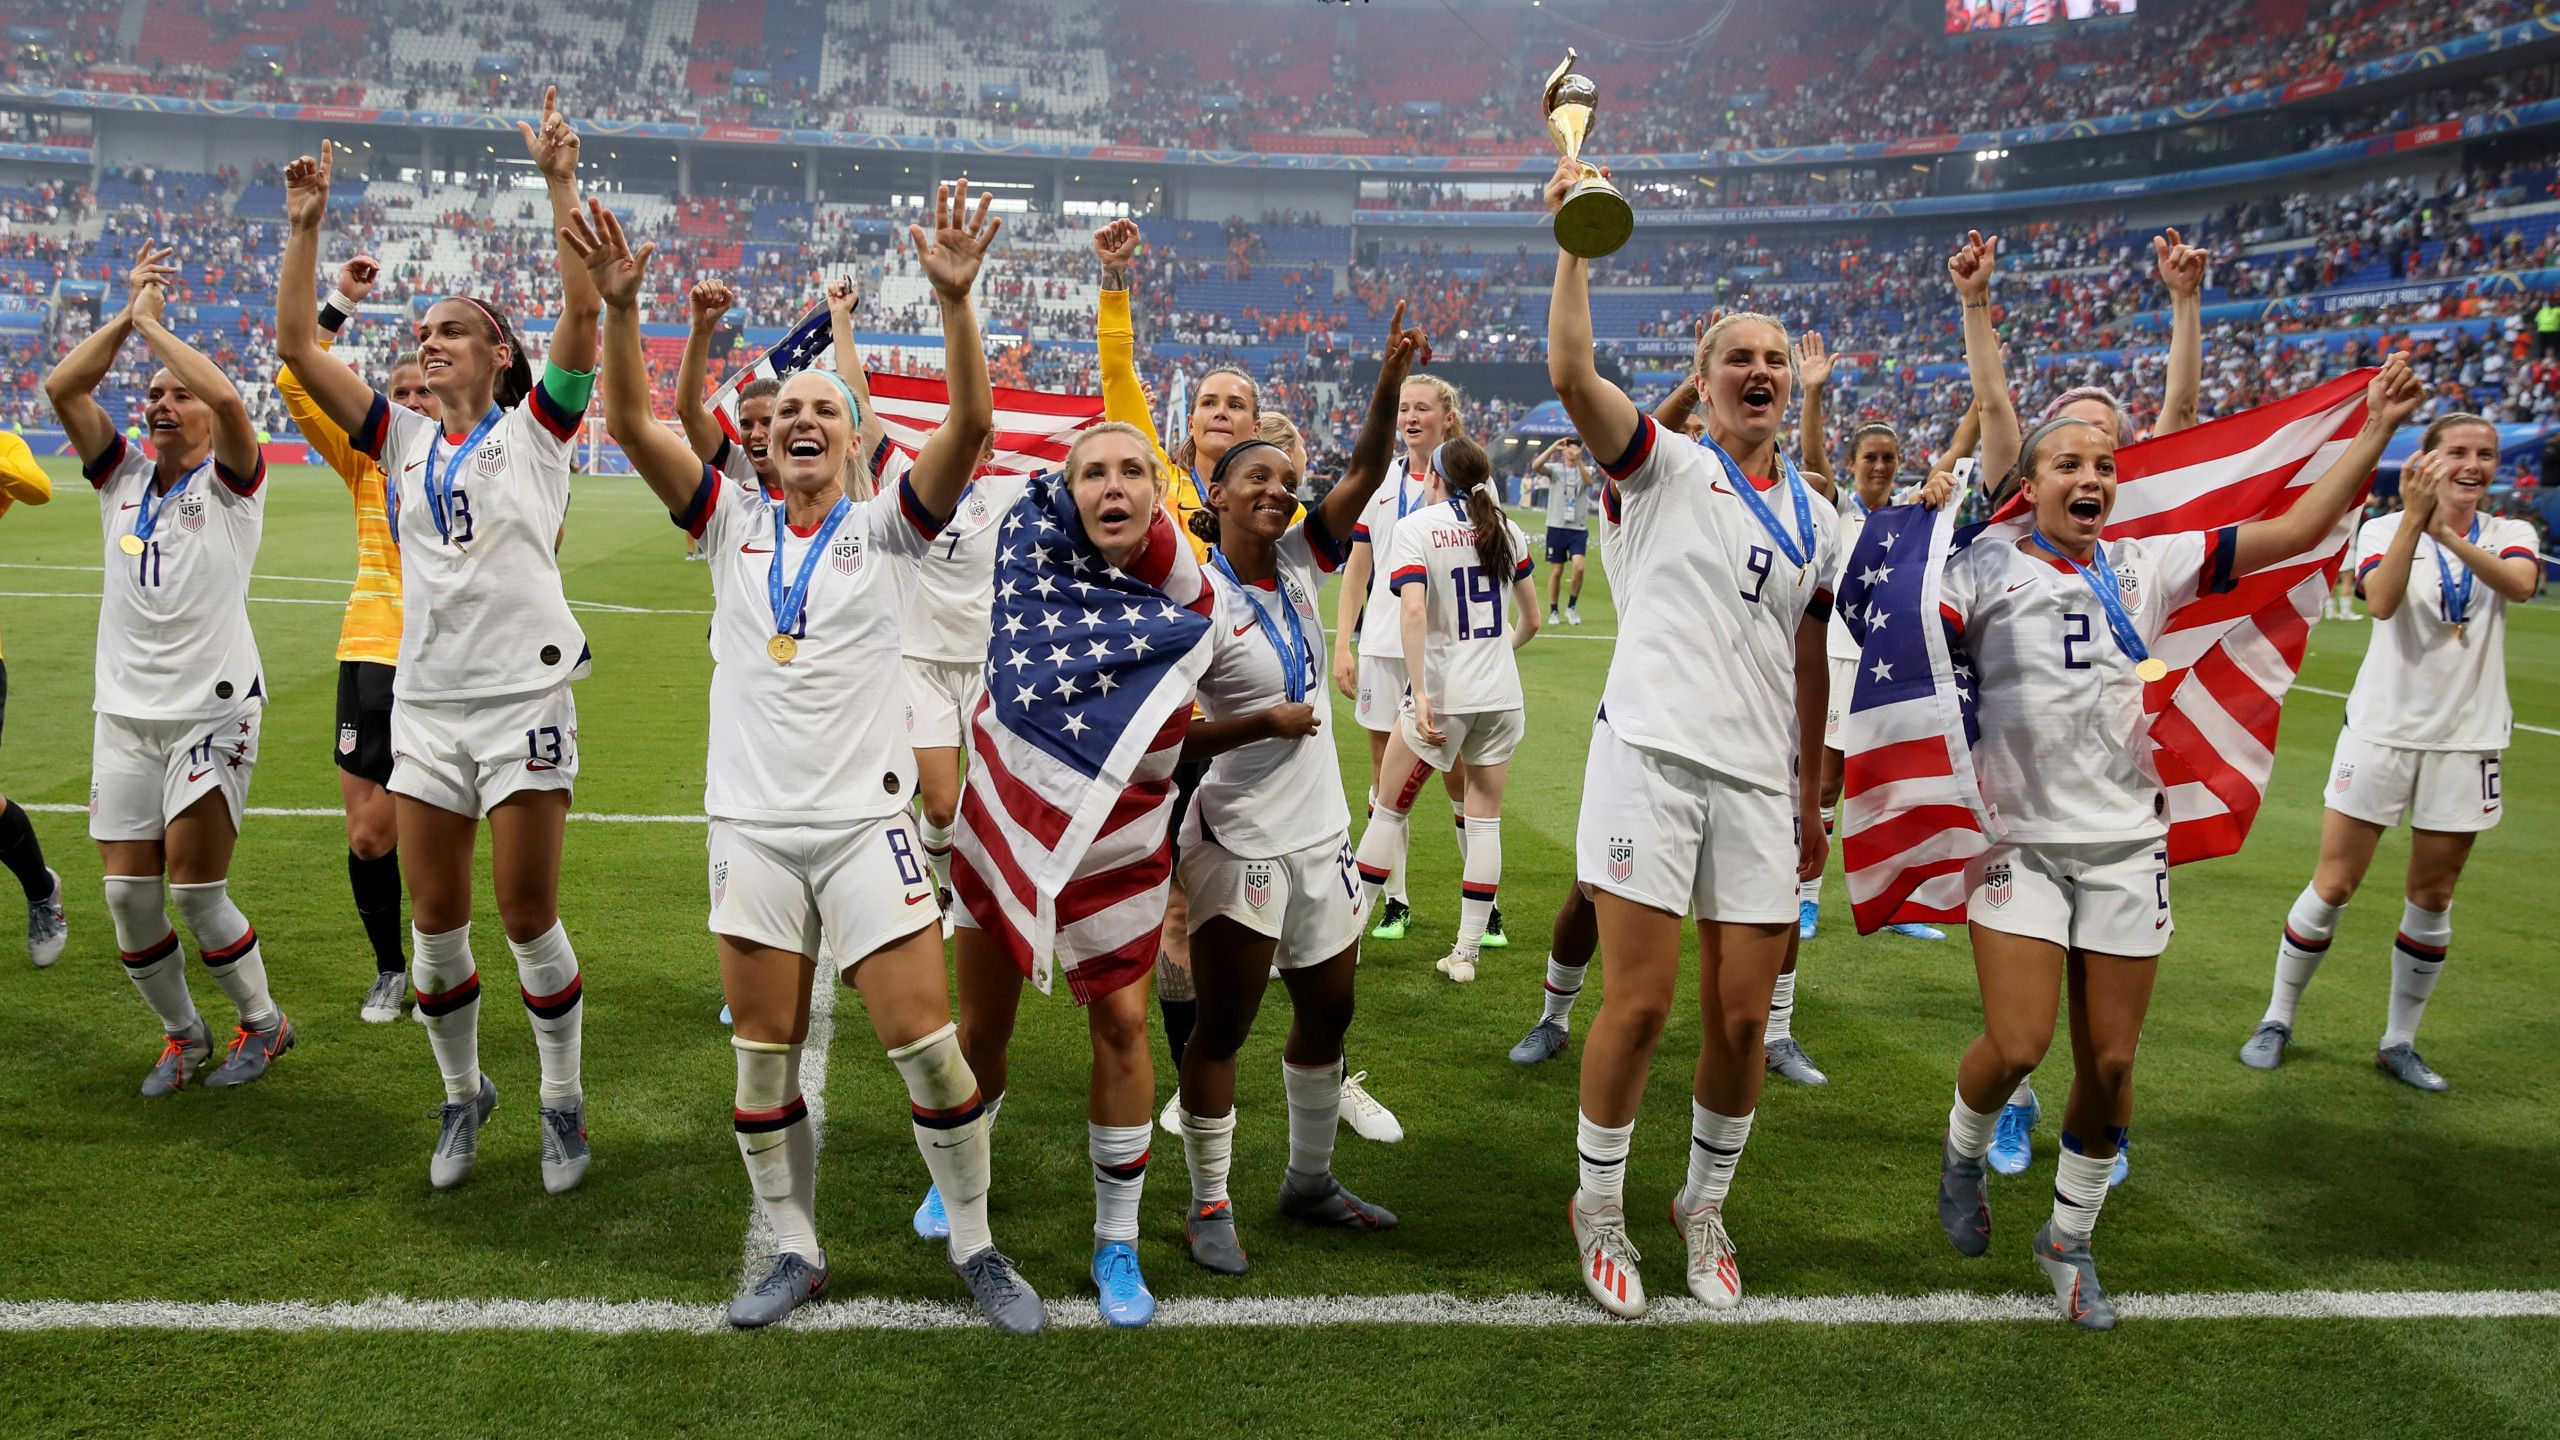 Despite World Cup win, USWNT still faces disparity in overall earnings